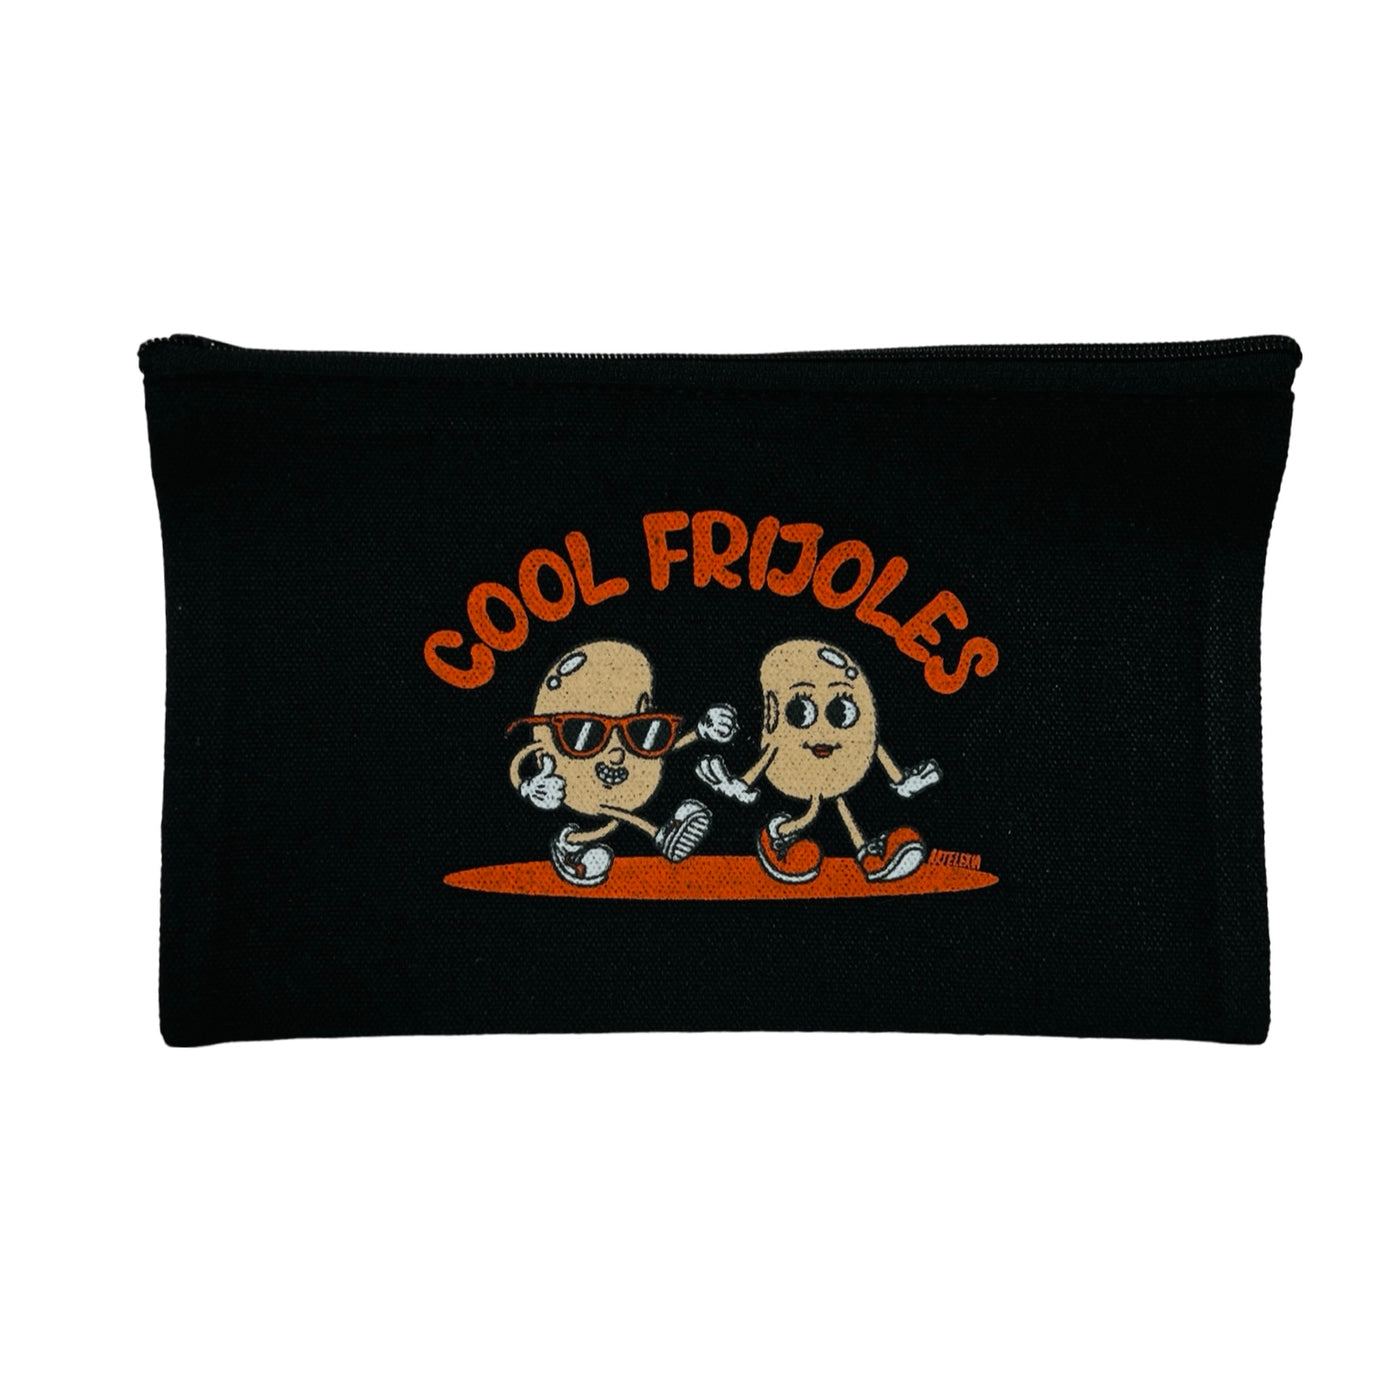 black canvas zip pouch with an illustration of two animated beans walking featuring the phrase Cool Frijoles in orange lettering